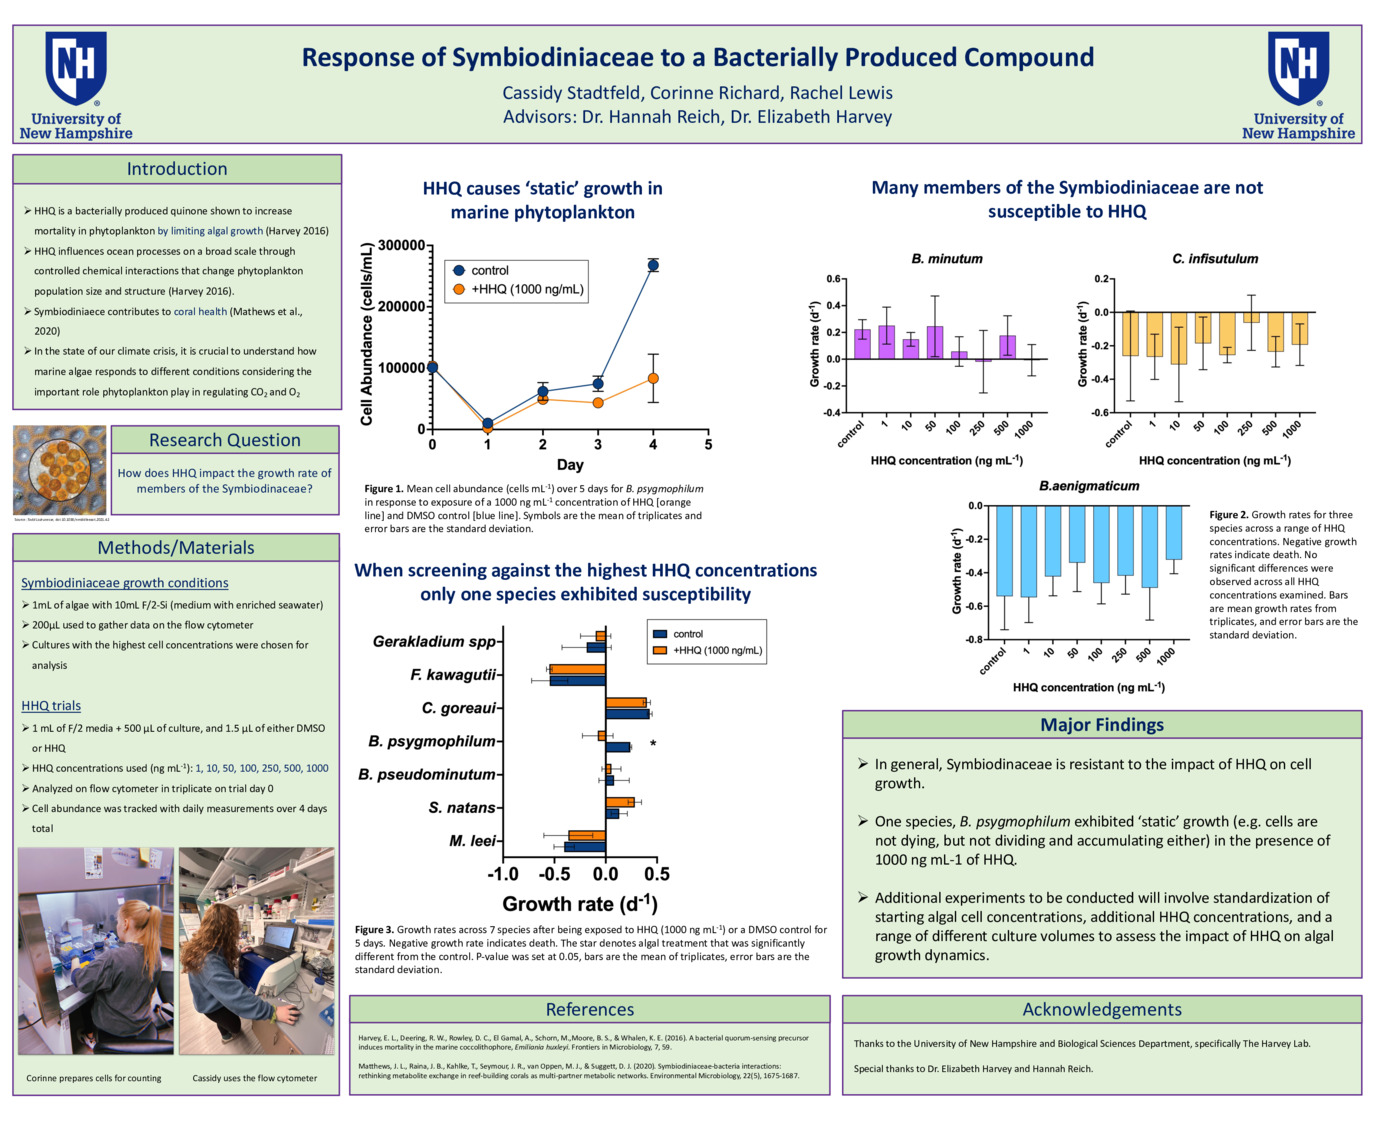 Corinne Richard And Cassidy Stadtfeld Urc Poster by crs1120